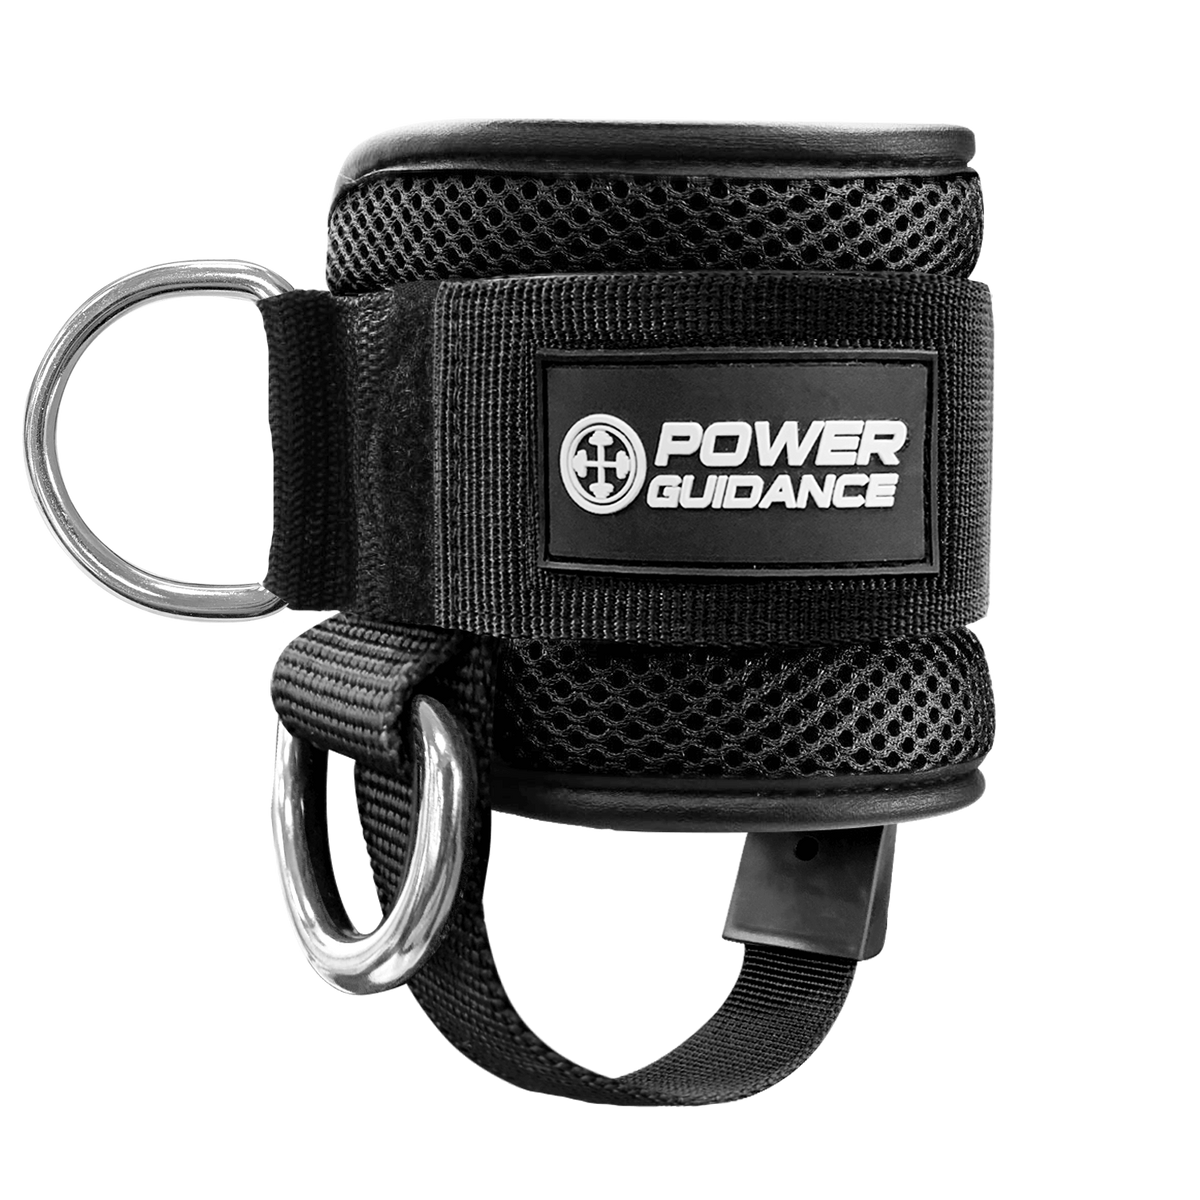 POWER GUIDANCE Ankle Adjustable Strap POWER GUIDANCE